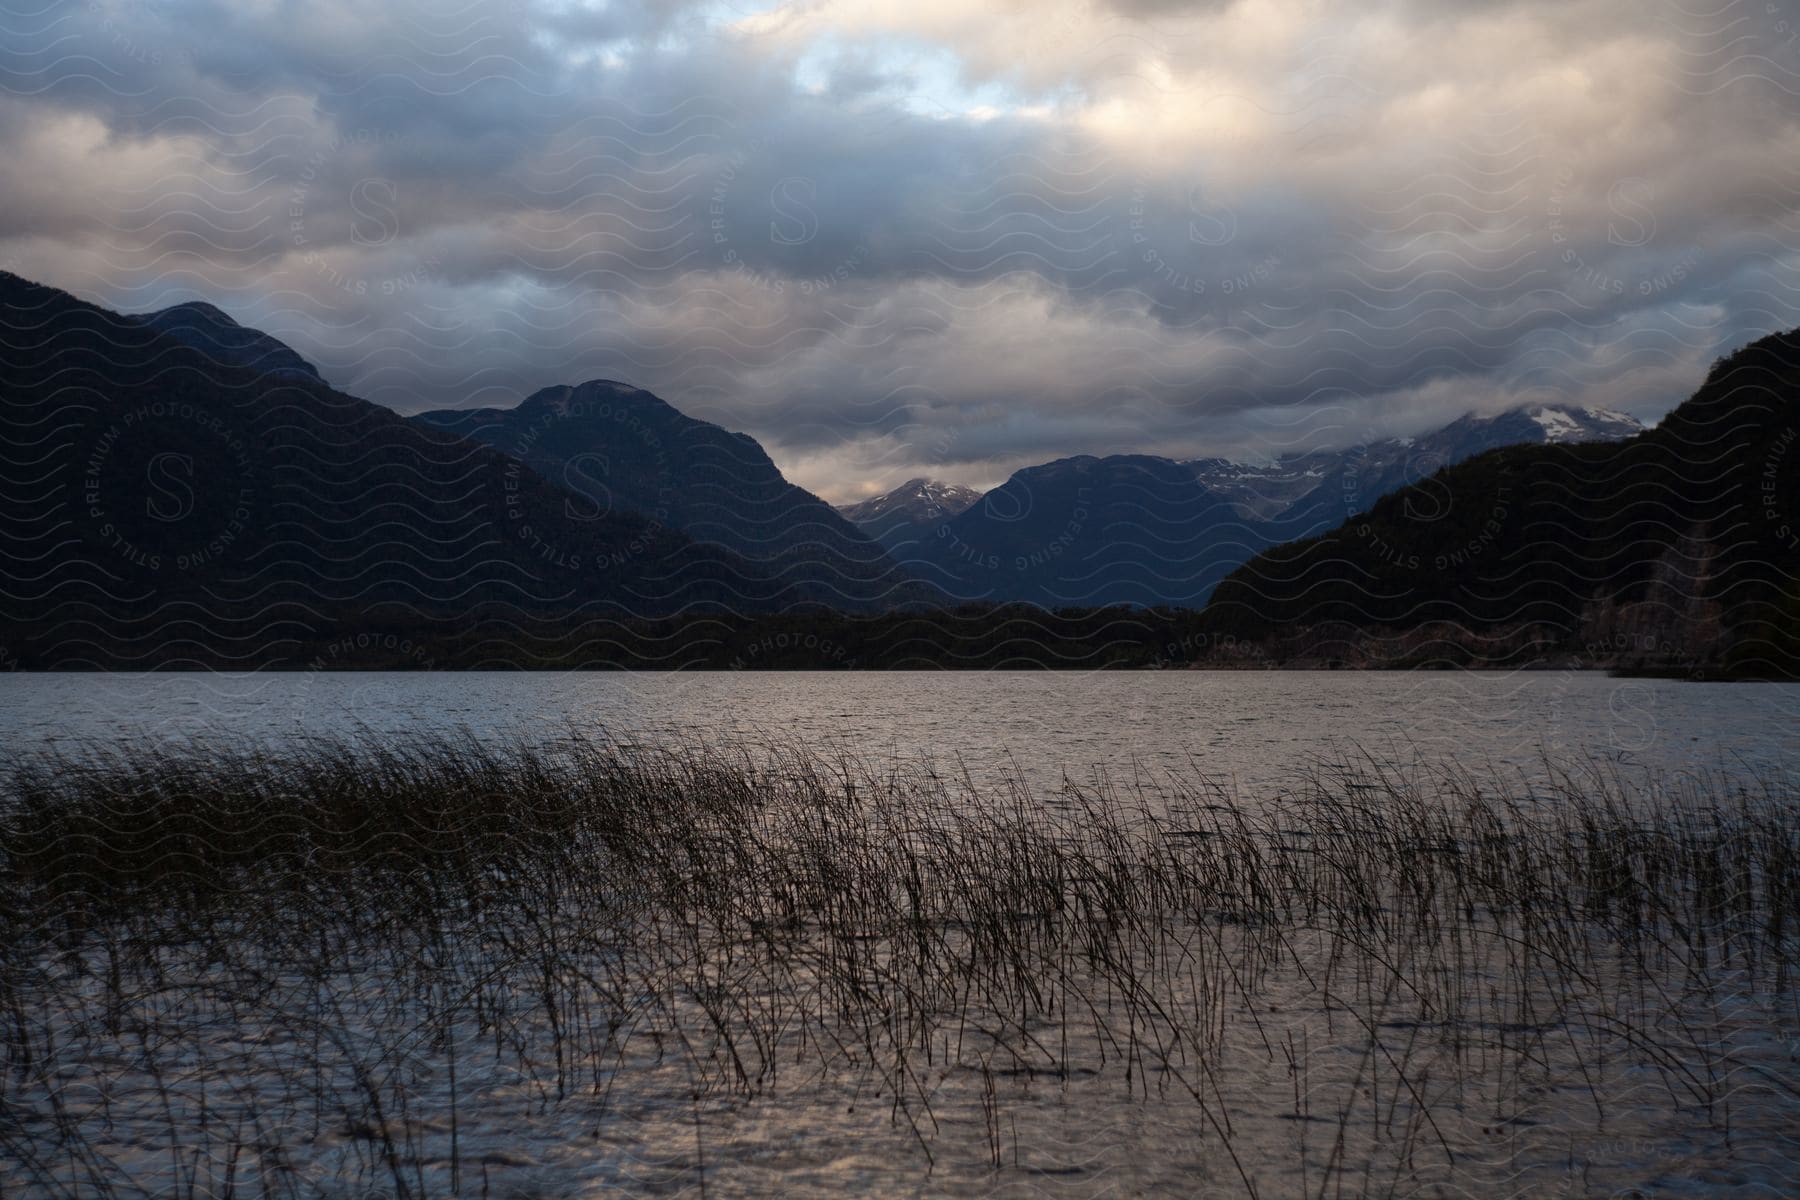 Reeds stand in a calm lake under a cloudy sky with a backdrop of layered mountains